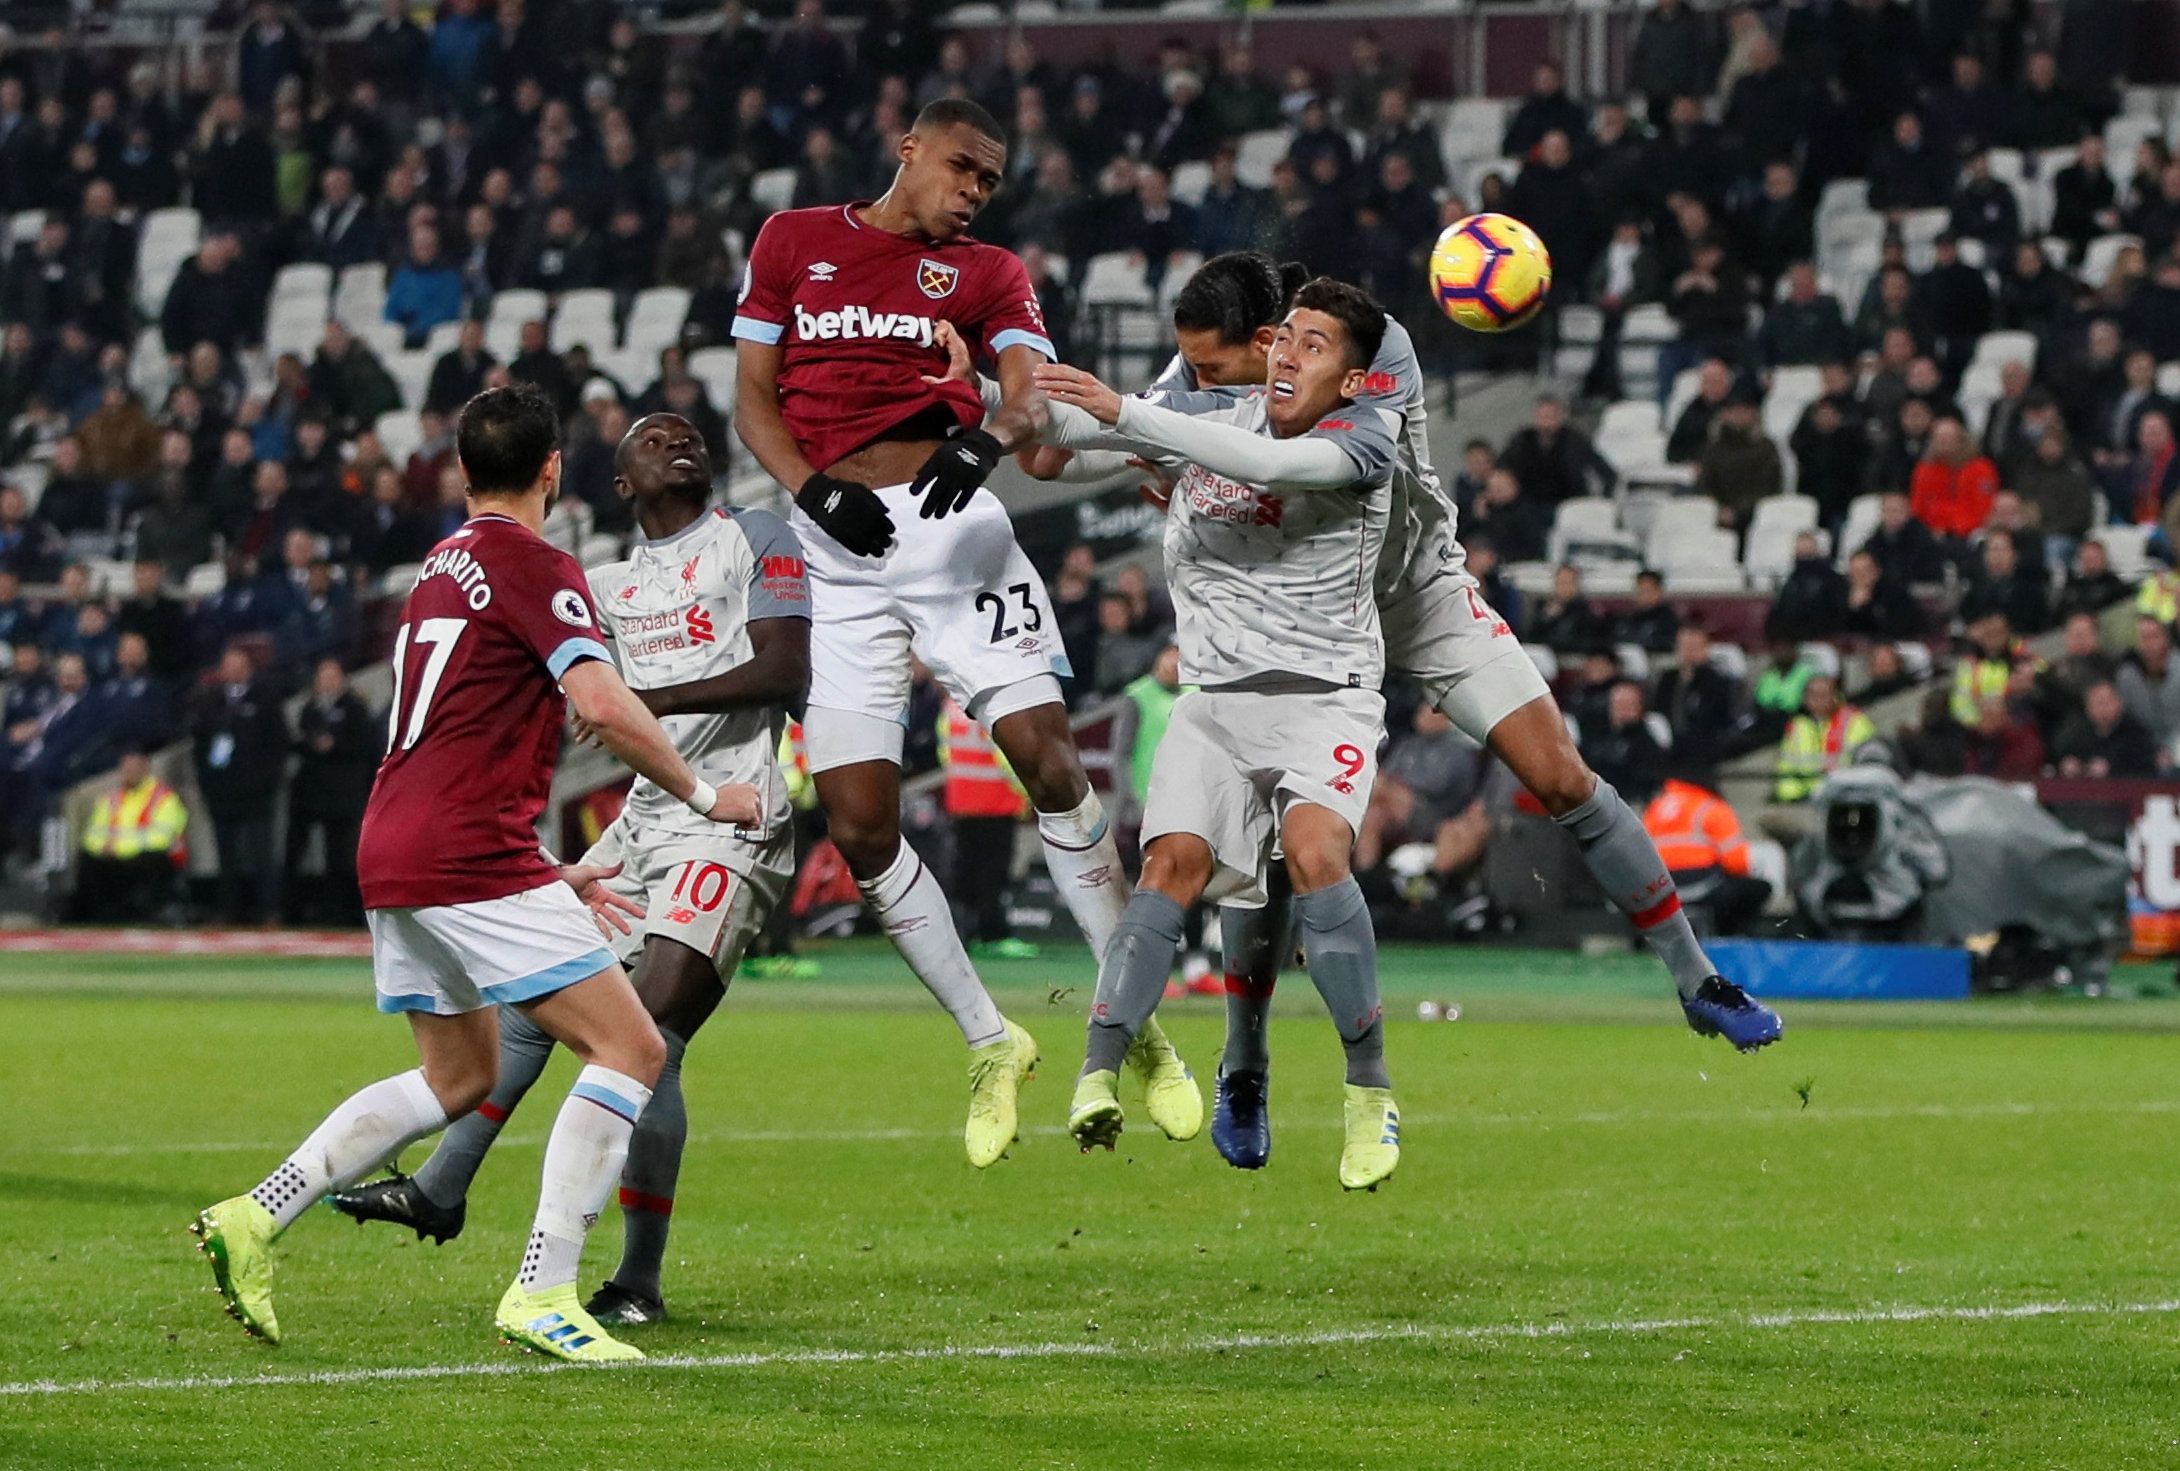 Soccer Football - Premier League - West Ham United v Liverpool - London Stadium, London, Britain - February 4, 2019 West Ham's Issa Diop misses a chance to score as Liverpool's Roberto Firmino looks on            REUTERS/David Klein  EDITORIAL USE ONLY. No use with unauthorized audio, video, data, fixture lists, club/league logos or 